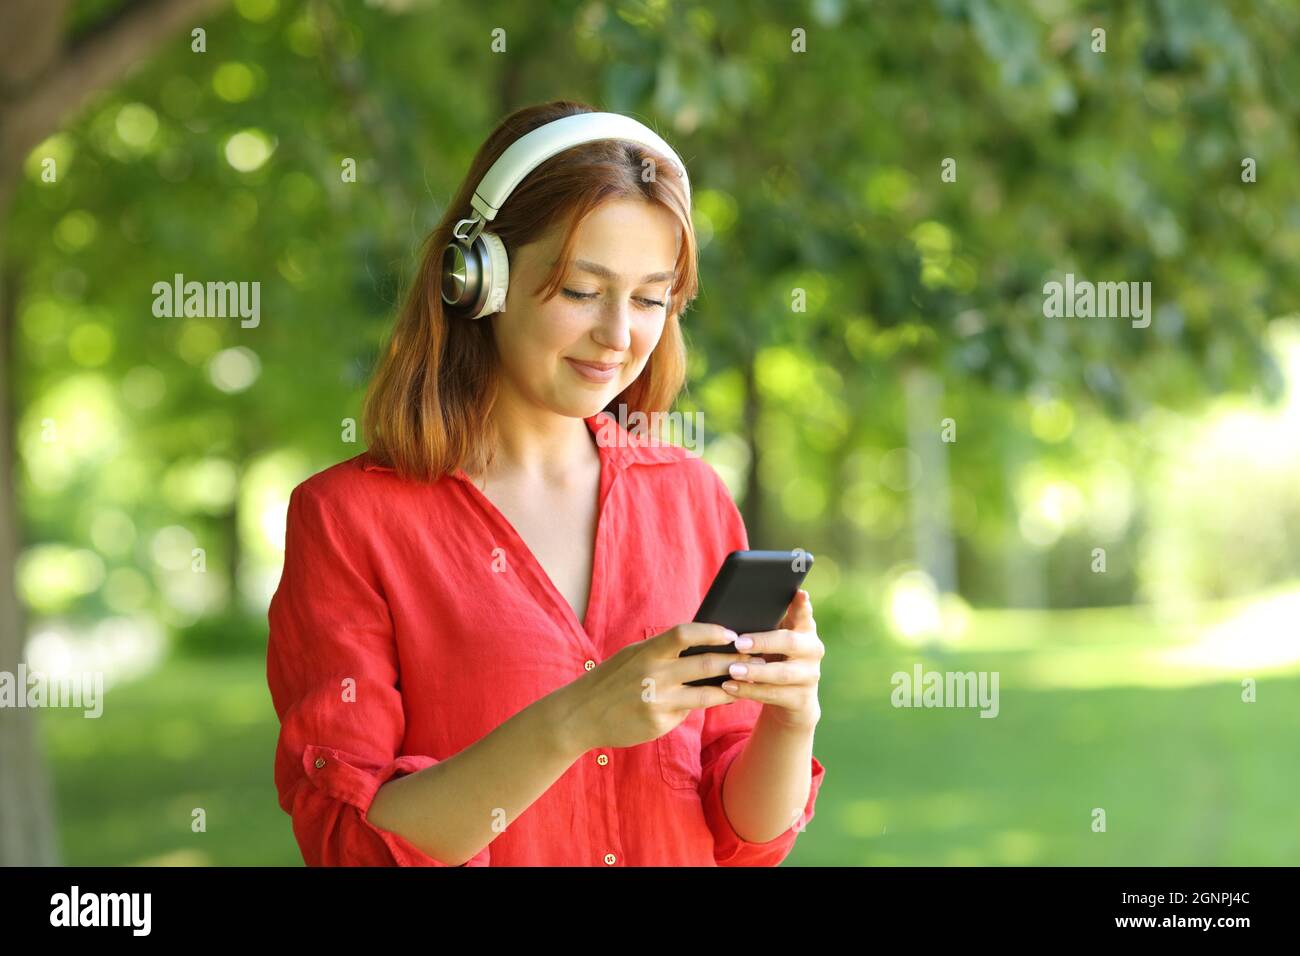 Happy woman in red wearing wireless headphones is waling listening to music on smartphone in a park Stock Photo